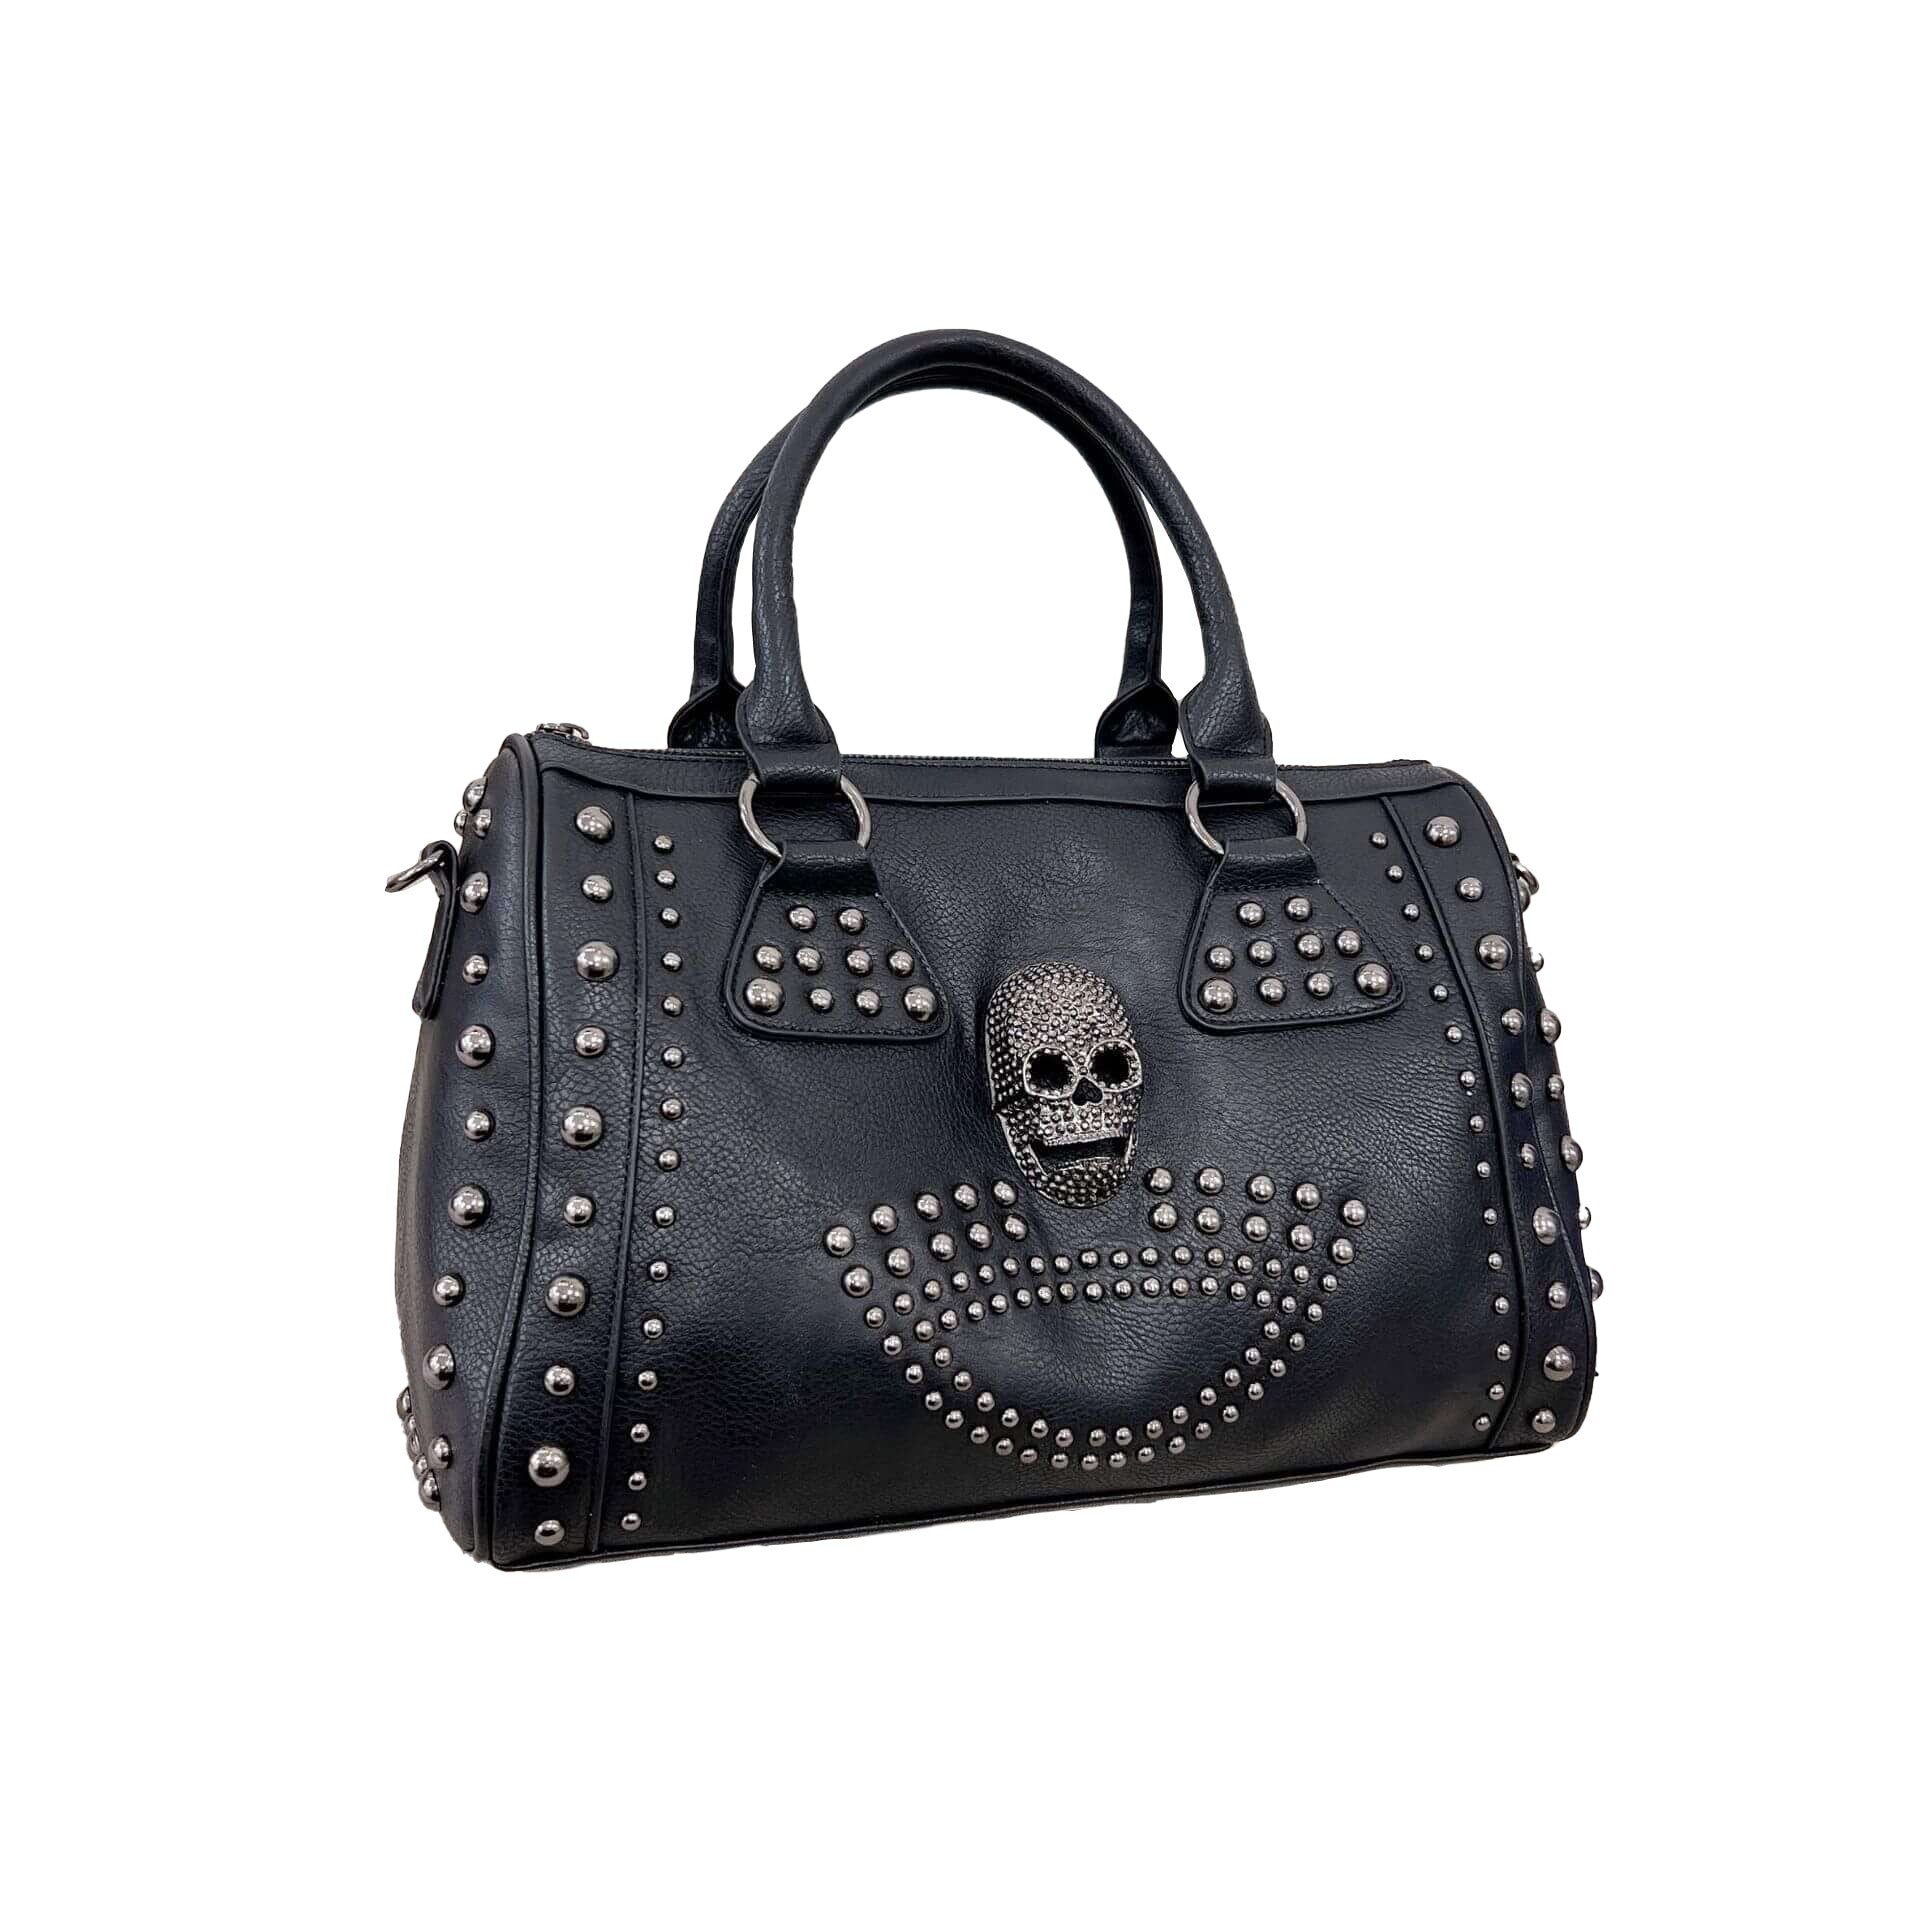 Ro Rox Rogue Large Studded Skull Faux Leather Gothic Bag